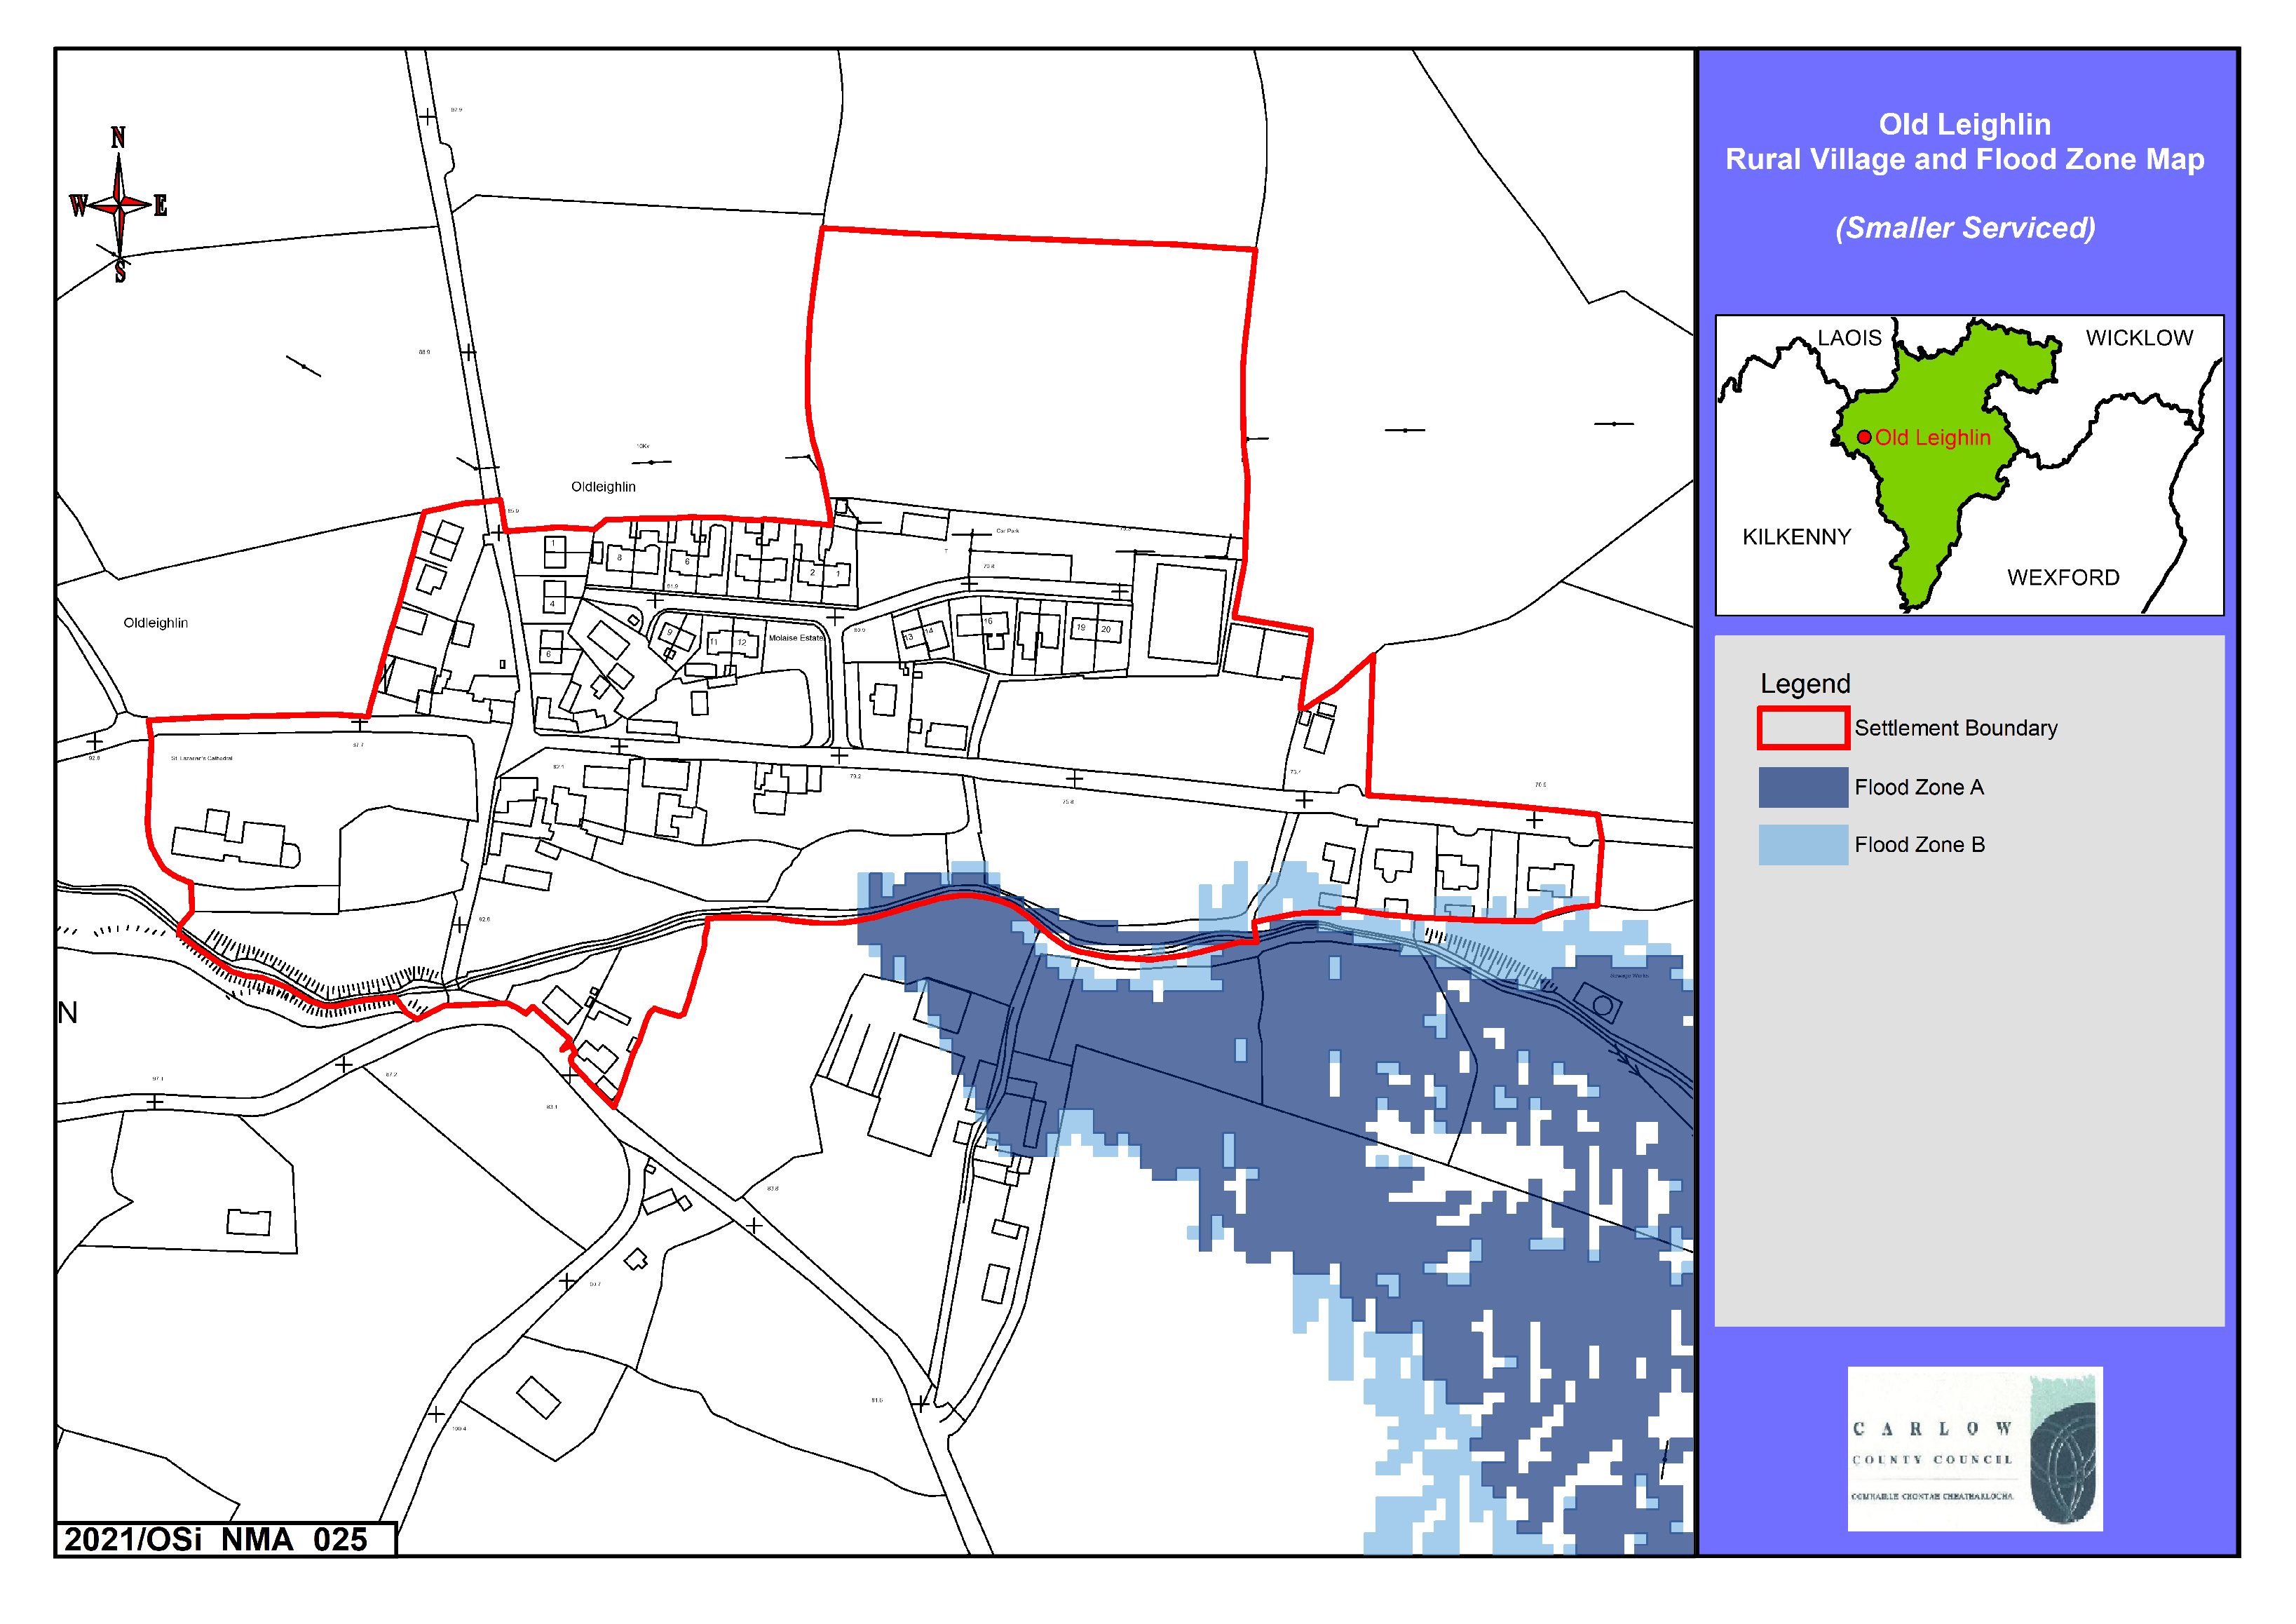 Old Leighlin Rural Village and Flood Zone Map